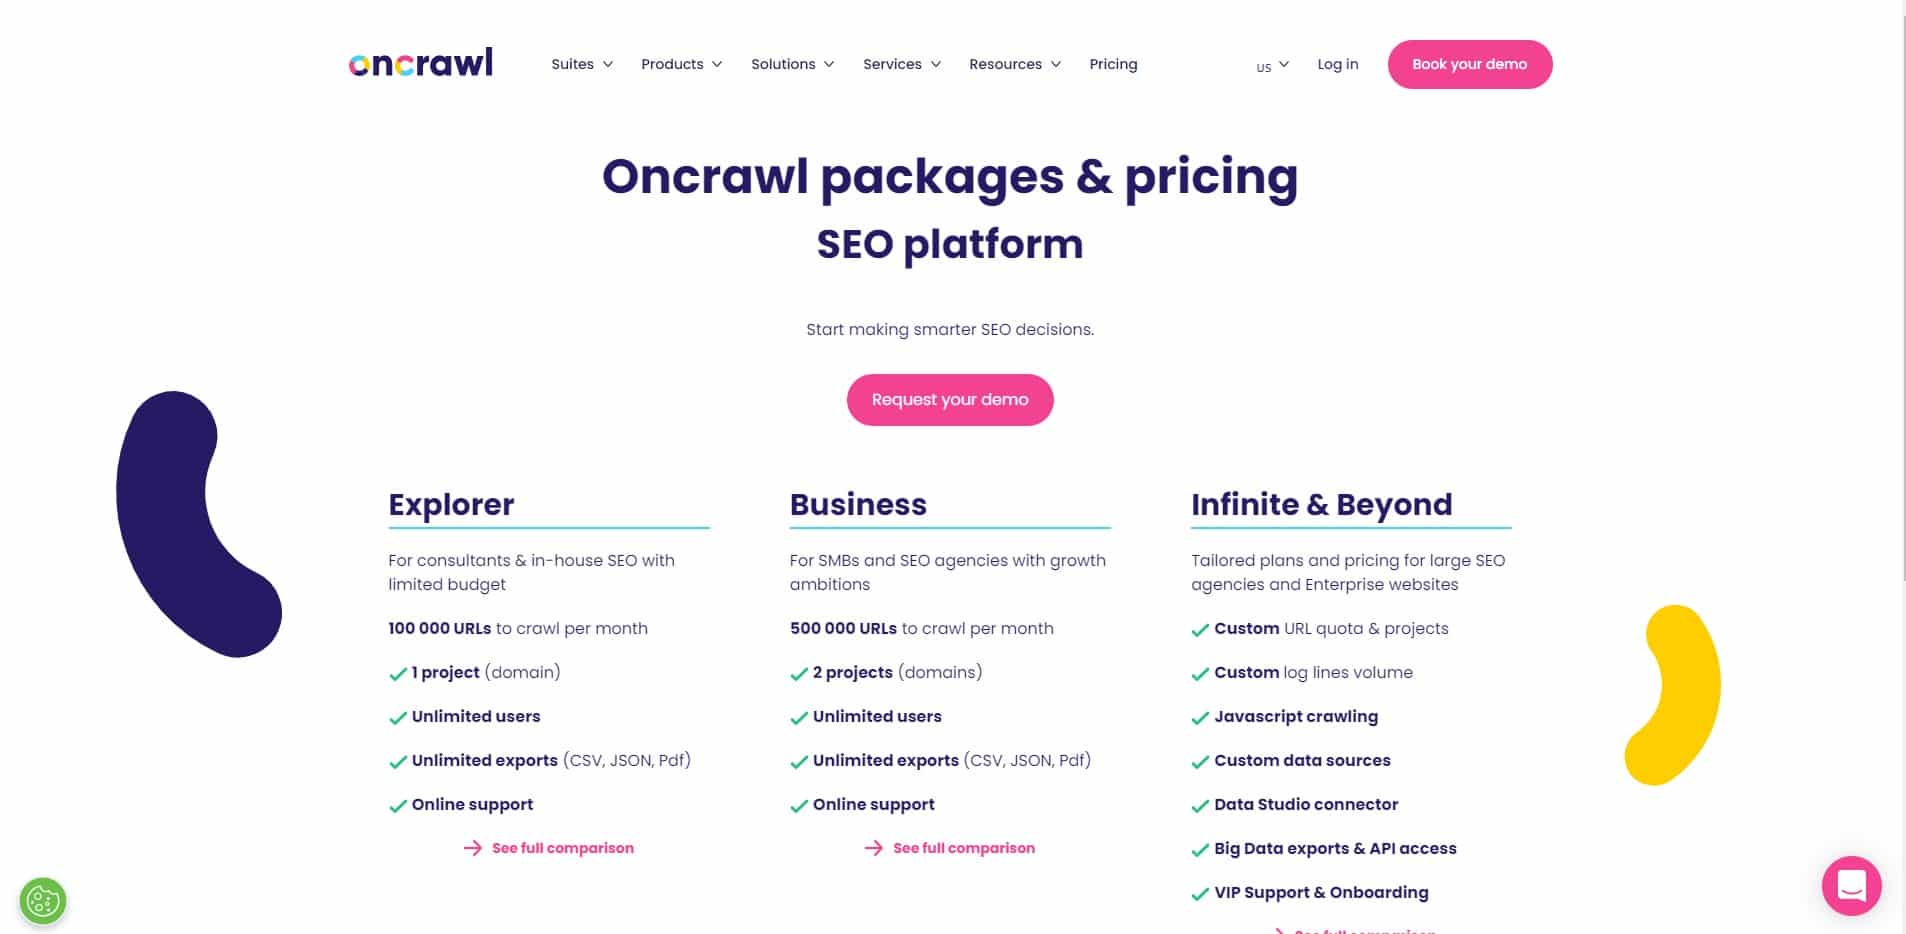 Oncrawl pricing is not public unlike to screaming frog alternatives